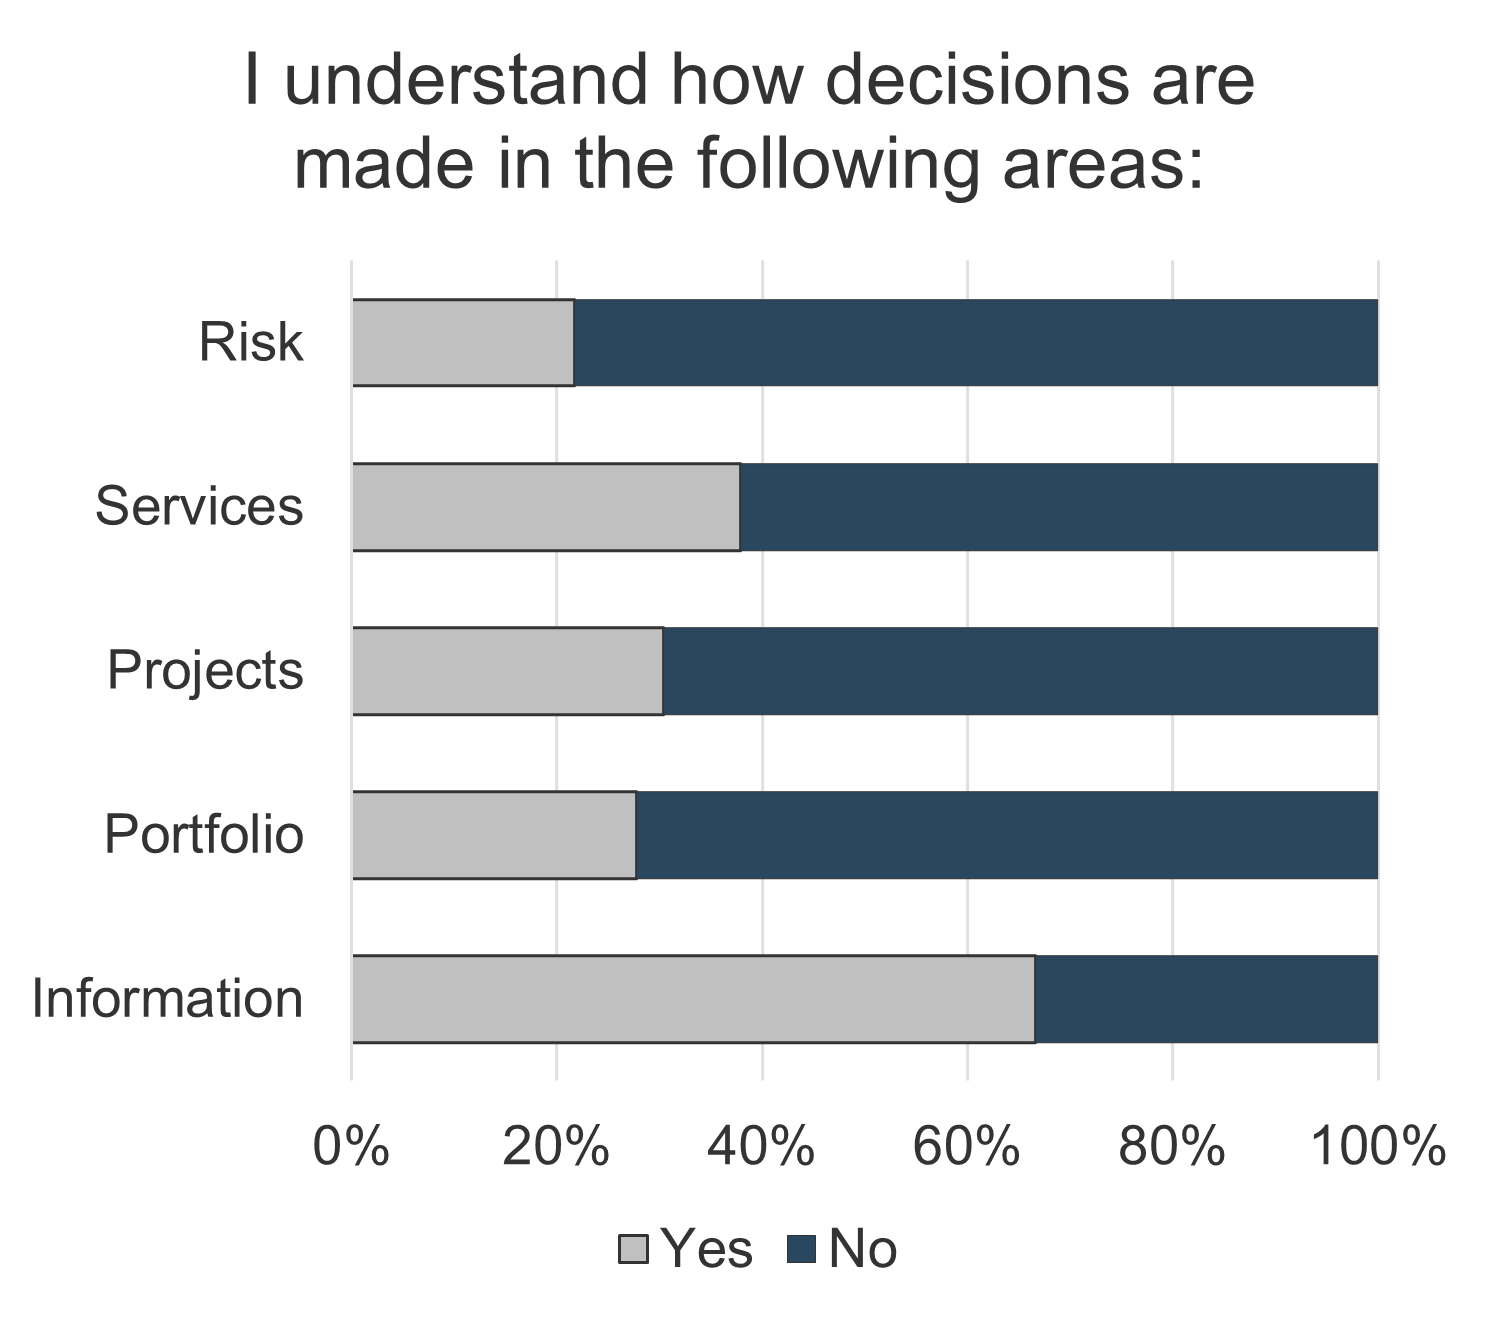 A bar graph is depicted. The title is: I understand how decisions are made in the following areas. The areas include risk, services, projects, portfolio, and information.